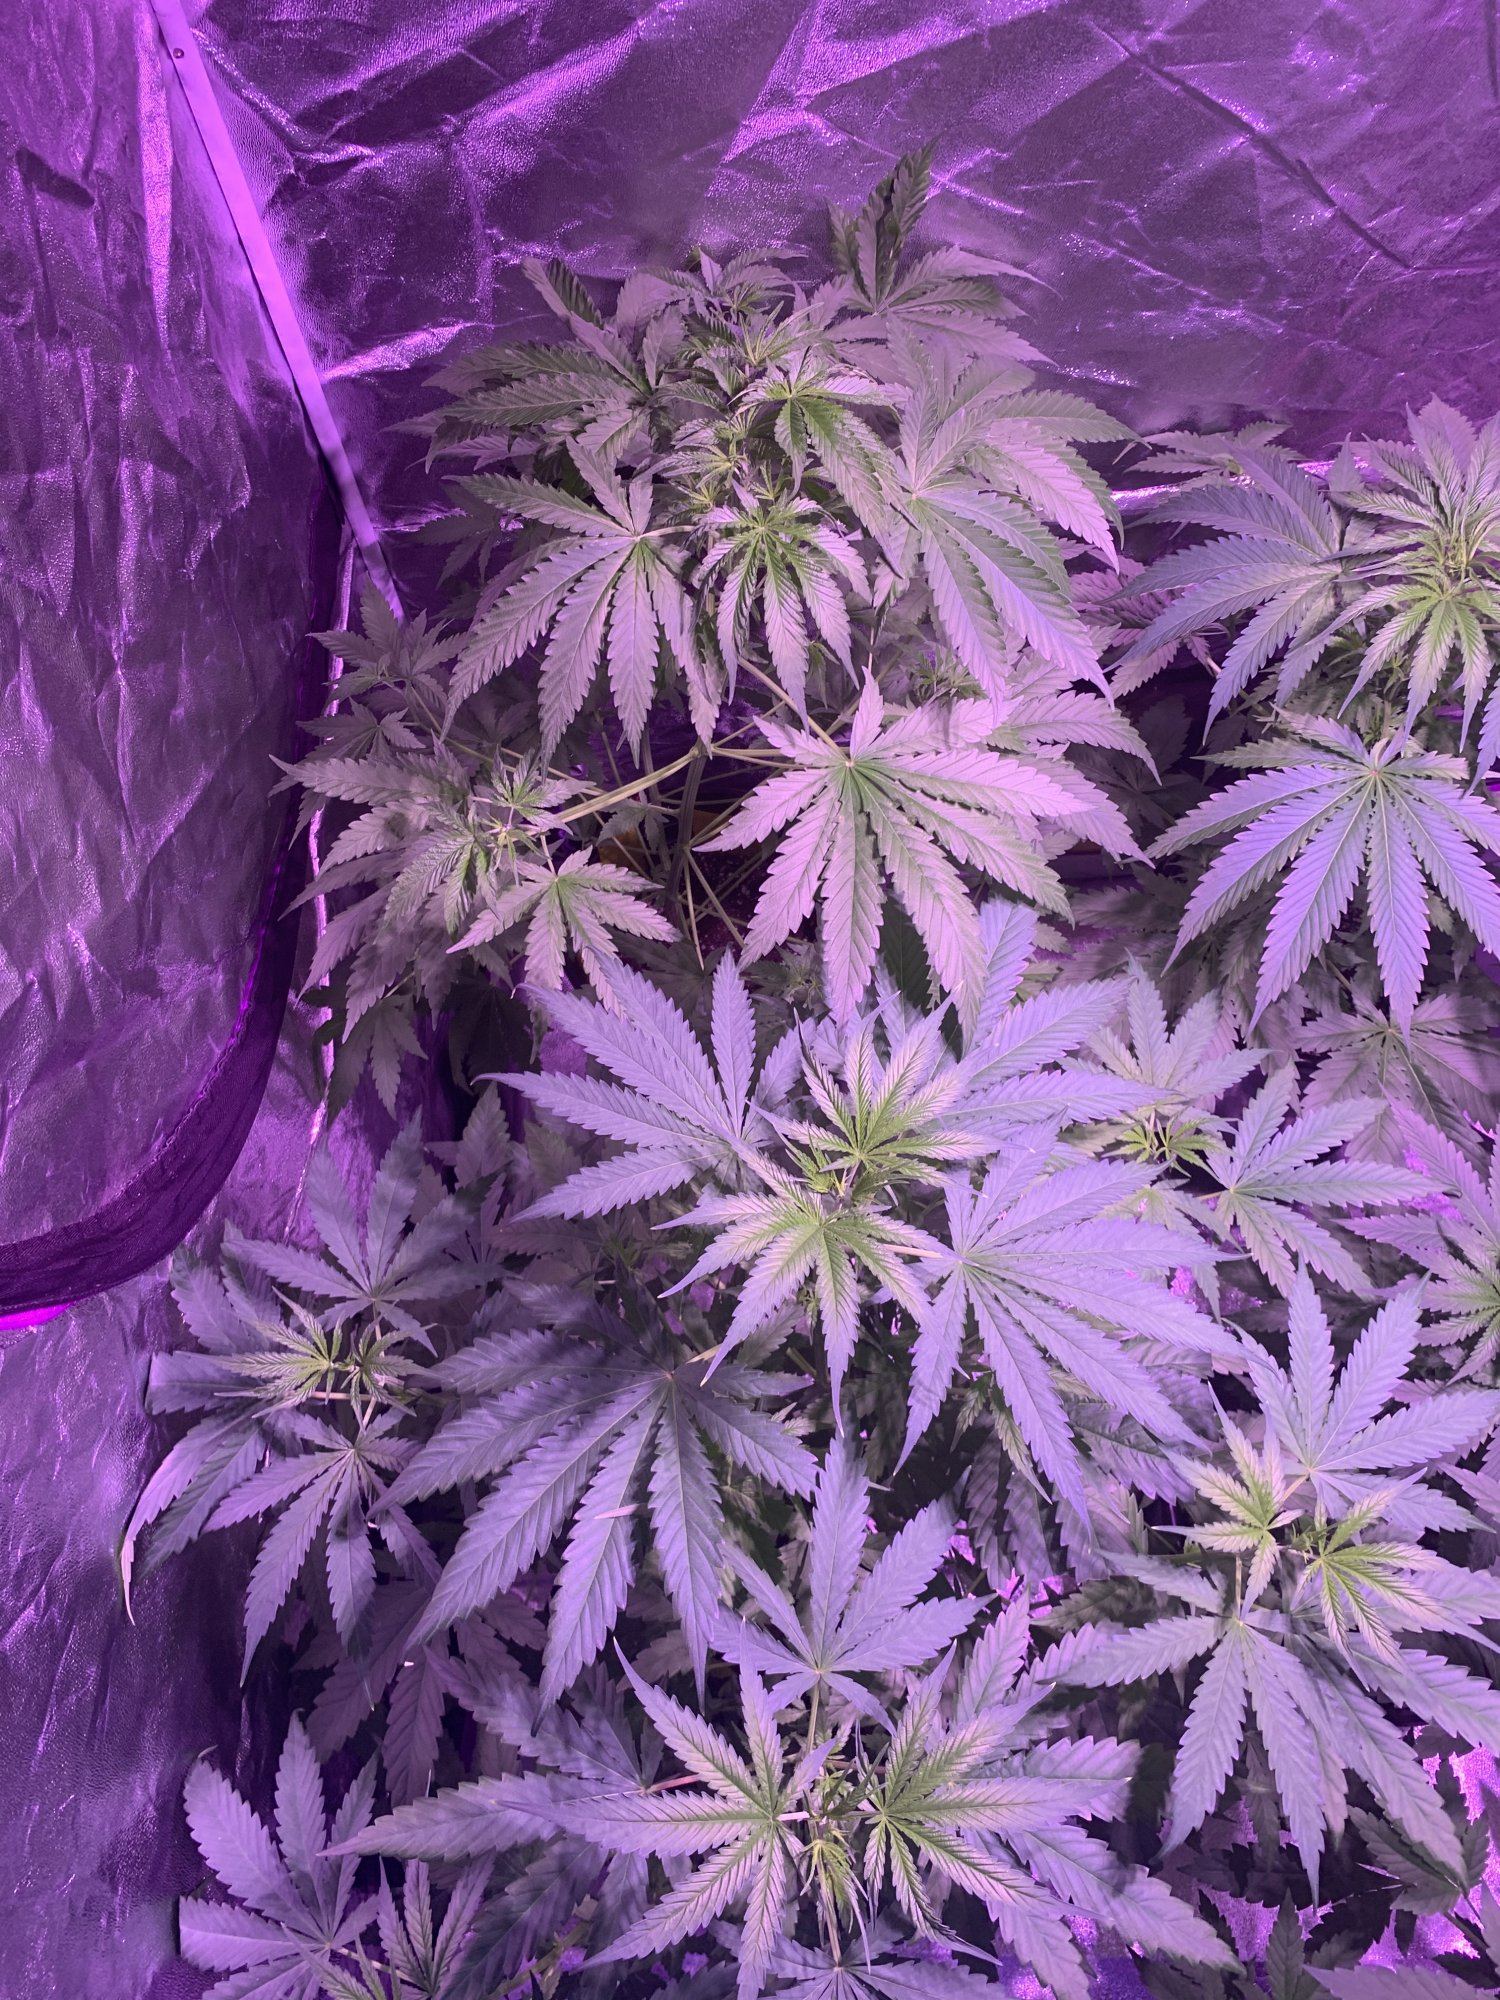 When should i flip these plants